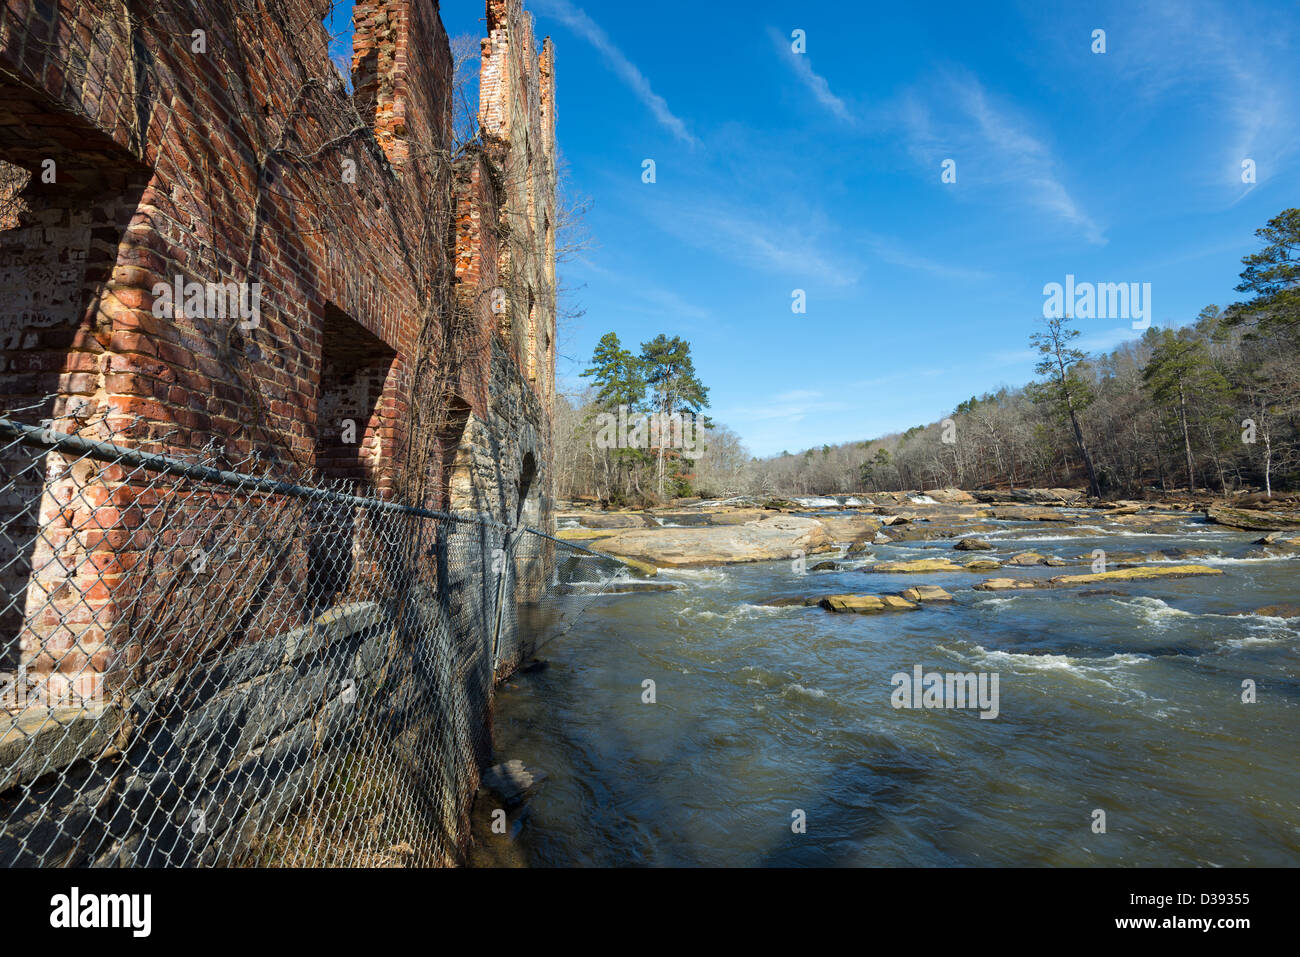 The New Manchester Mill is located along Sweetwater Creek in Lithia Springs, Georgia about 15 east of Atlanta. Stock Photo